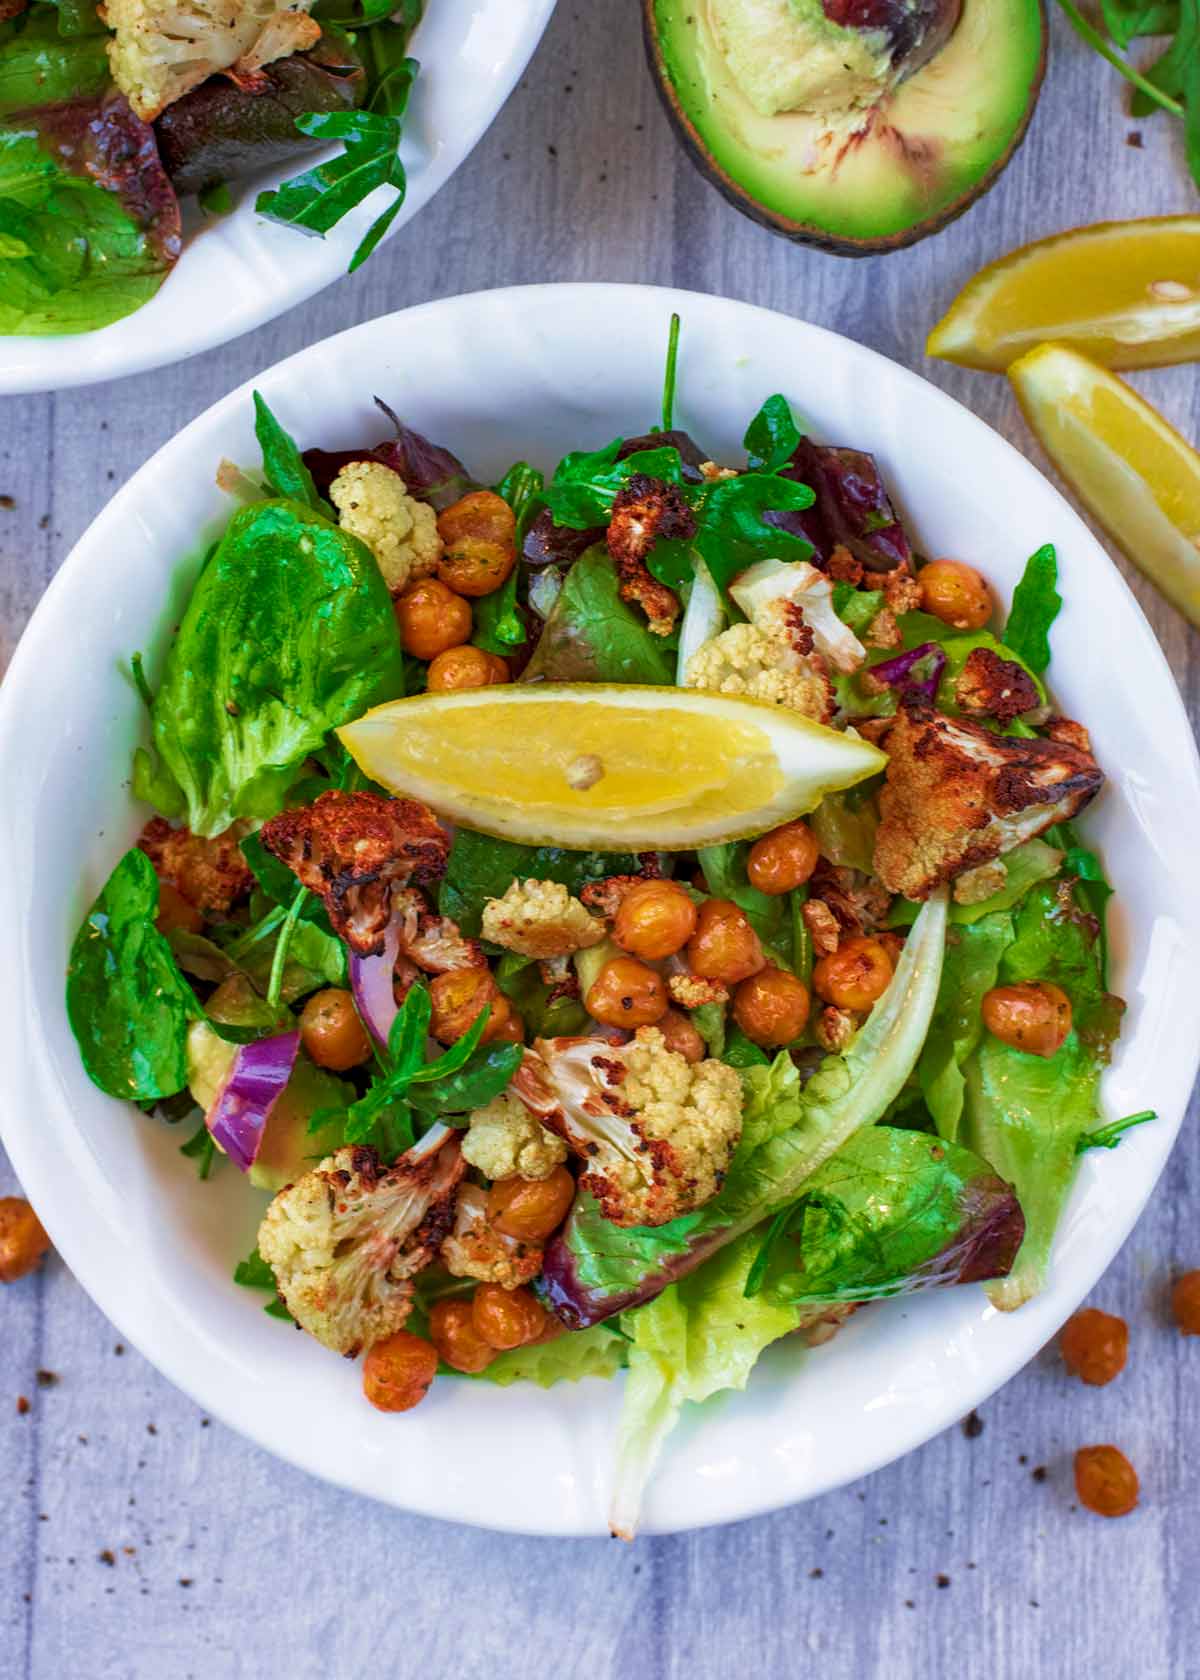 A bowl of salad topped with cauliflower and chickpeas.